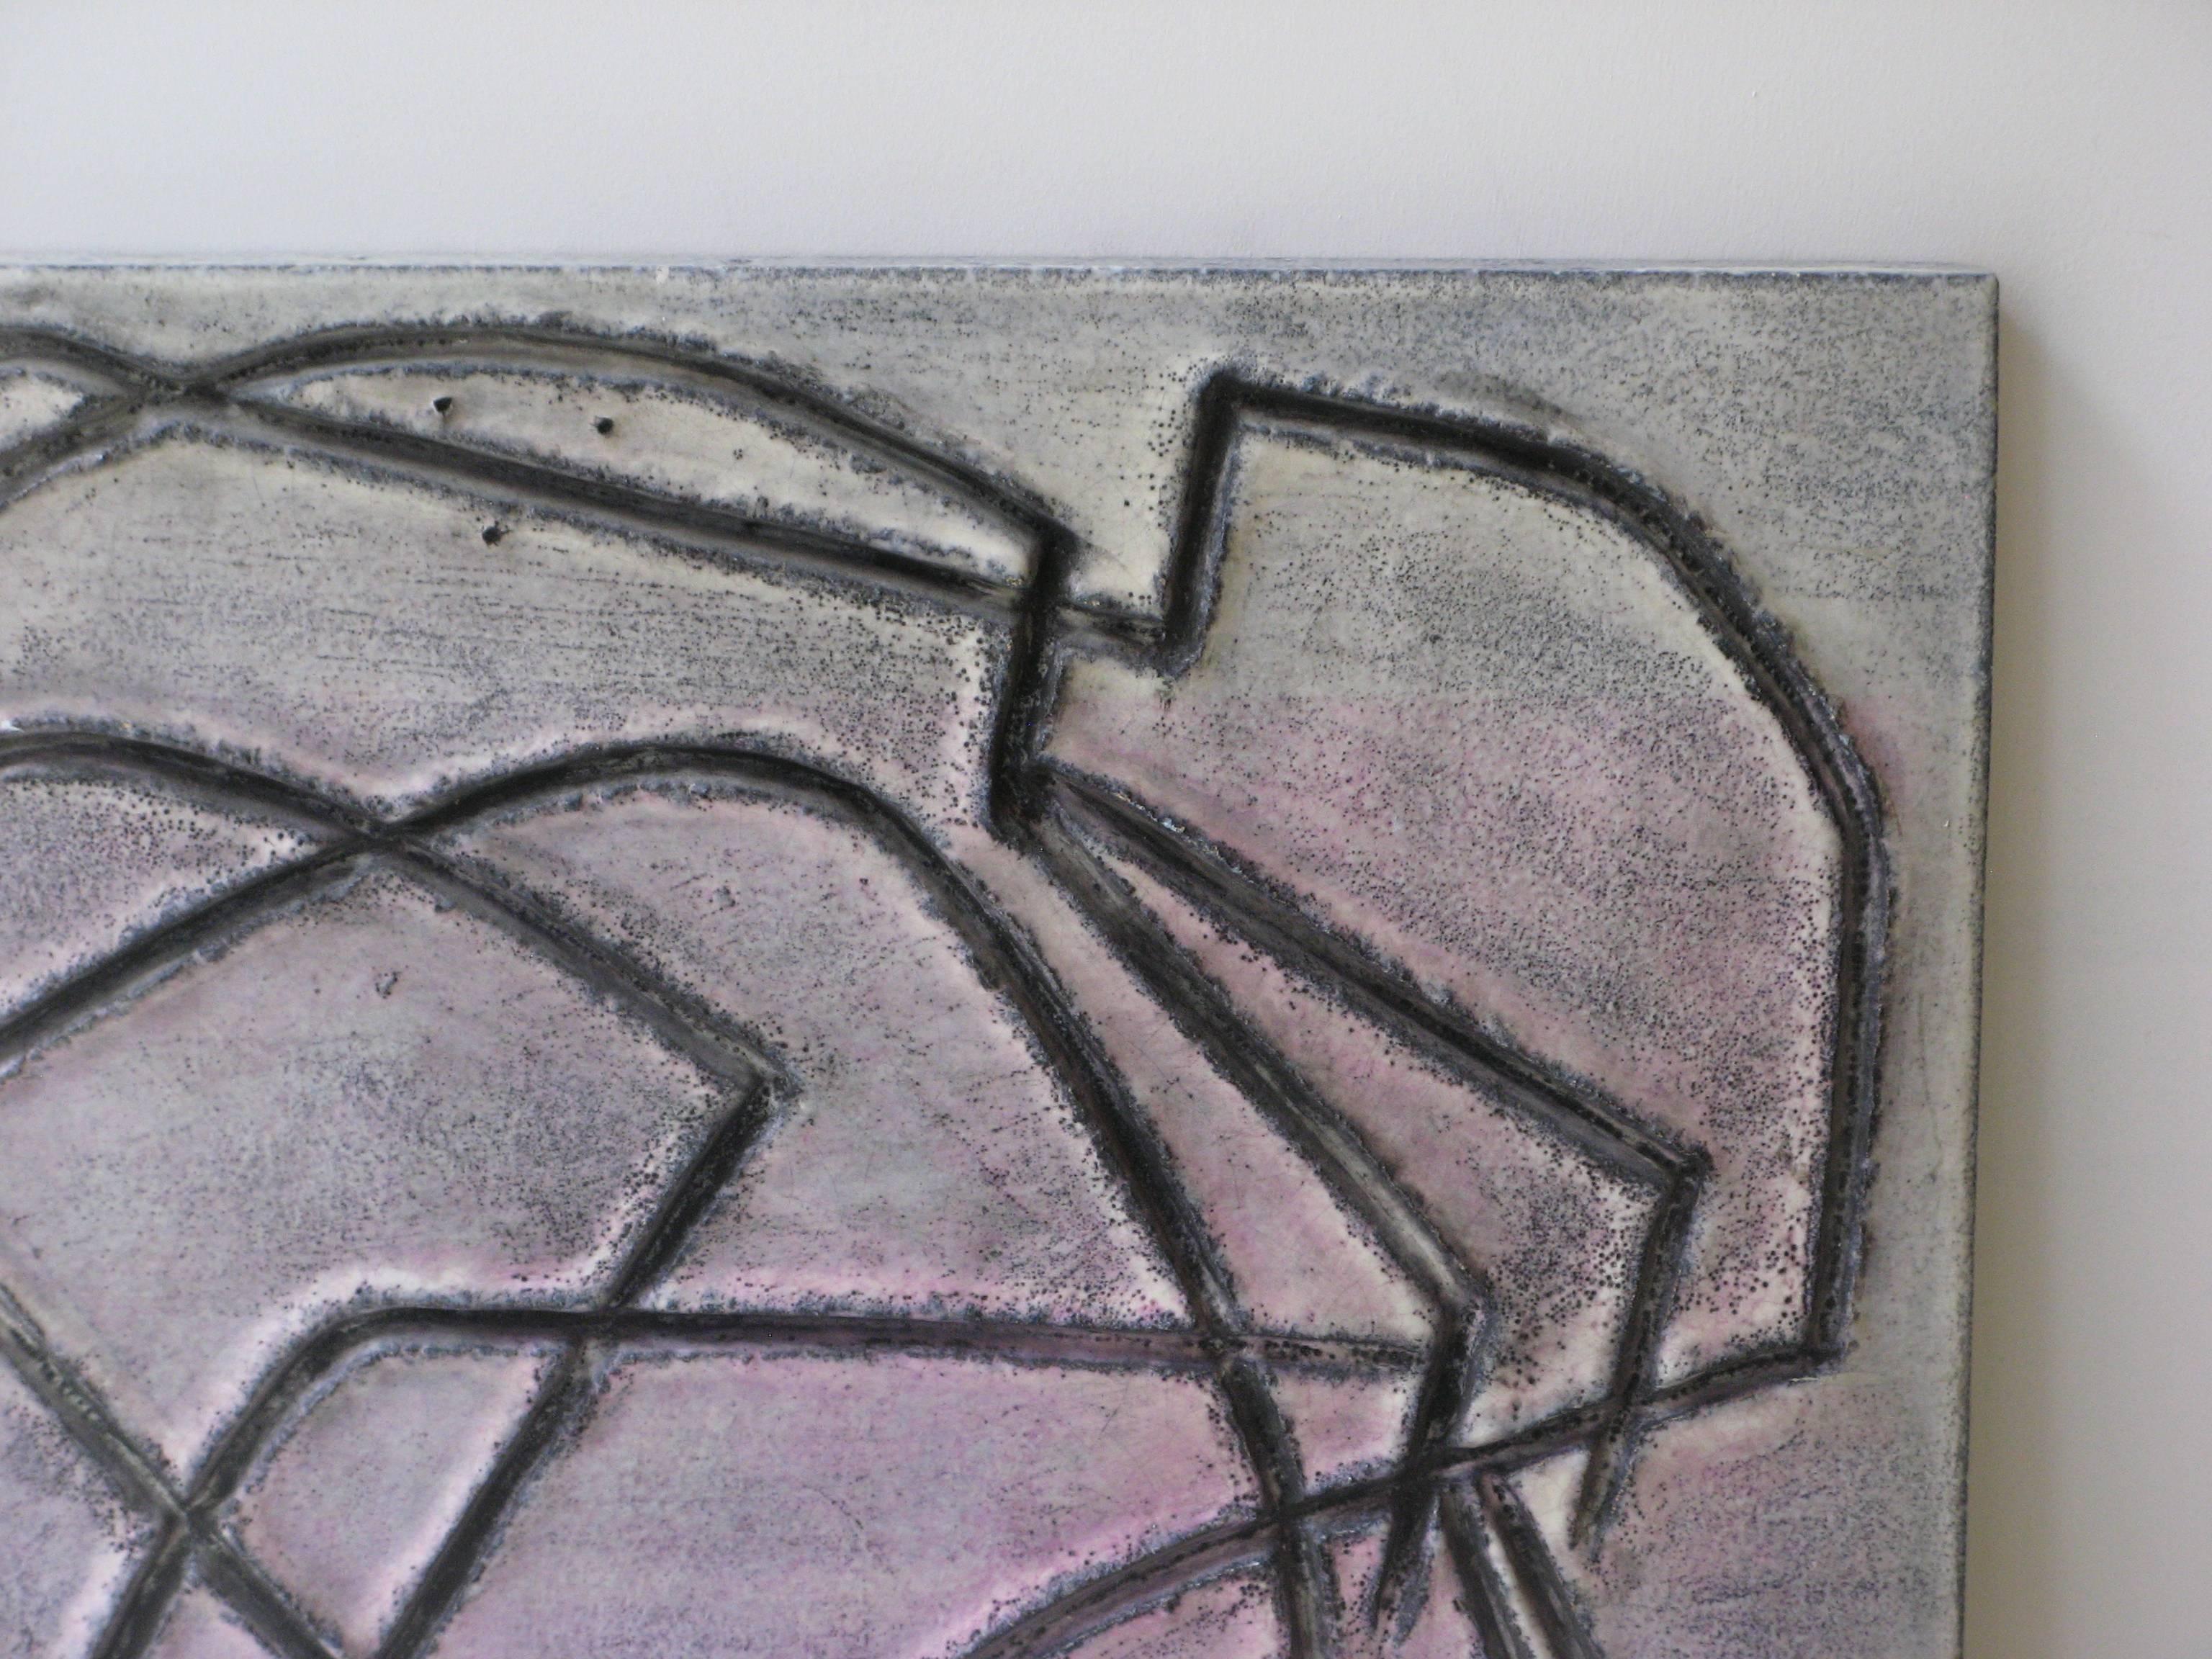 Abstract studio panel in ceramic in grey, rose, and powder shades by Marcello Fantoni, Italy, 9, 1915-2011, circa 1970.
Signed Fantoni.
Provenance: From an Italian collector.